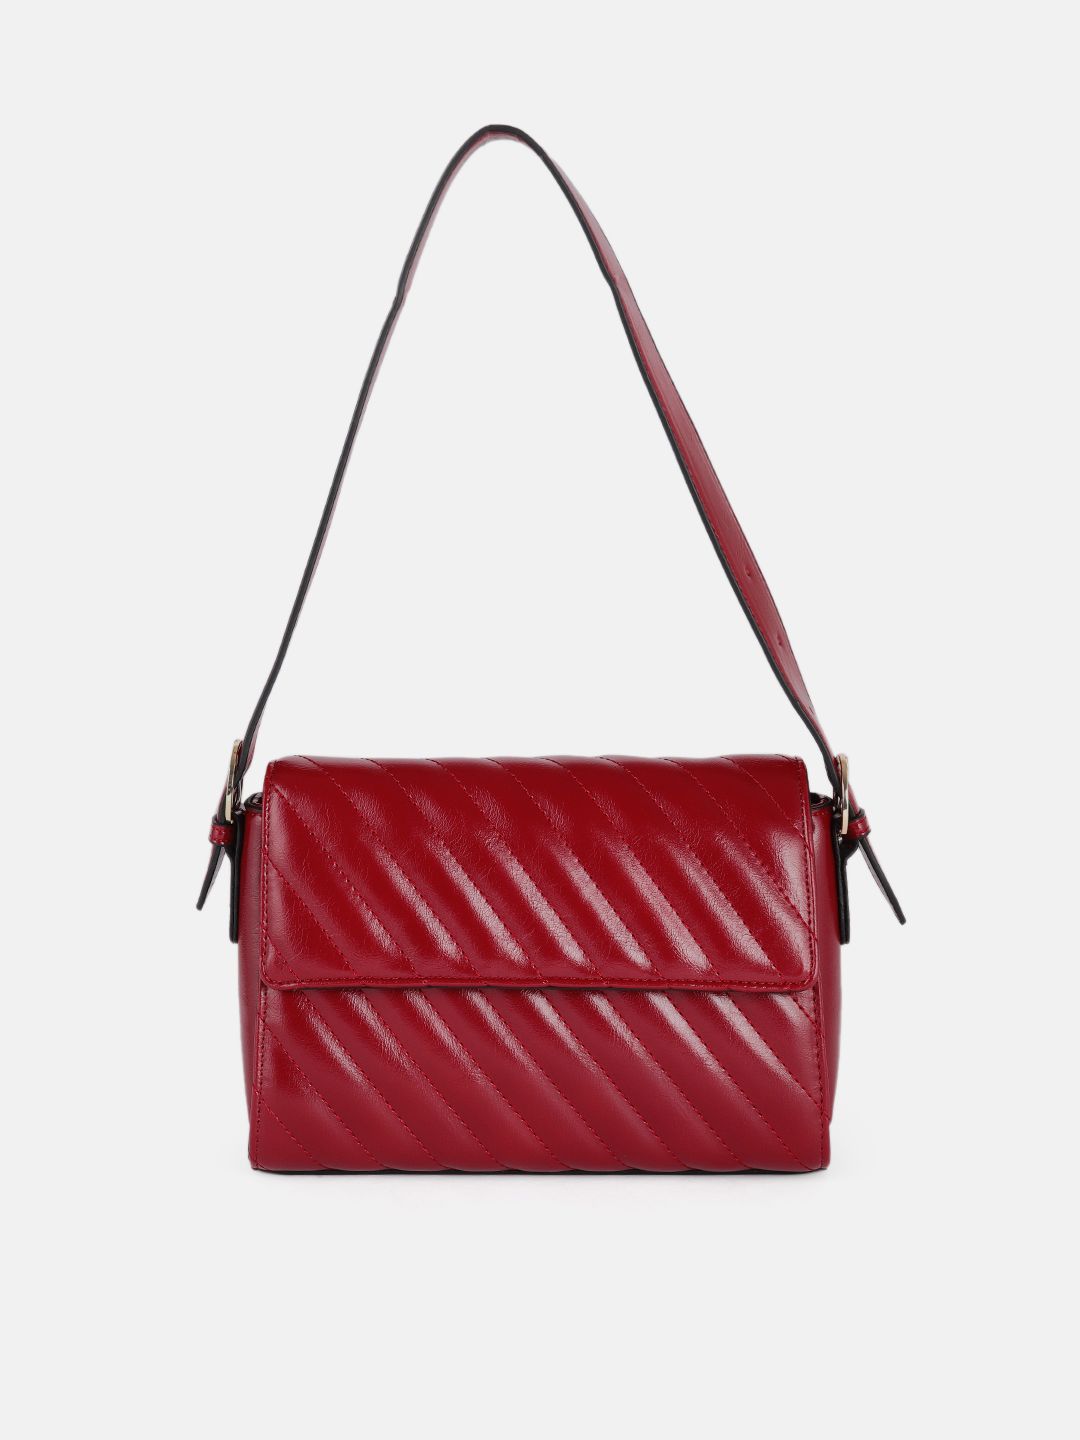 DressBerry Burgundy Solid PU Regular Structured Shoulder Bag with Quilted Detail Price in India